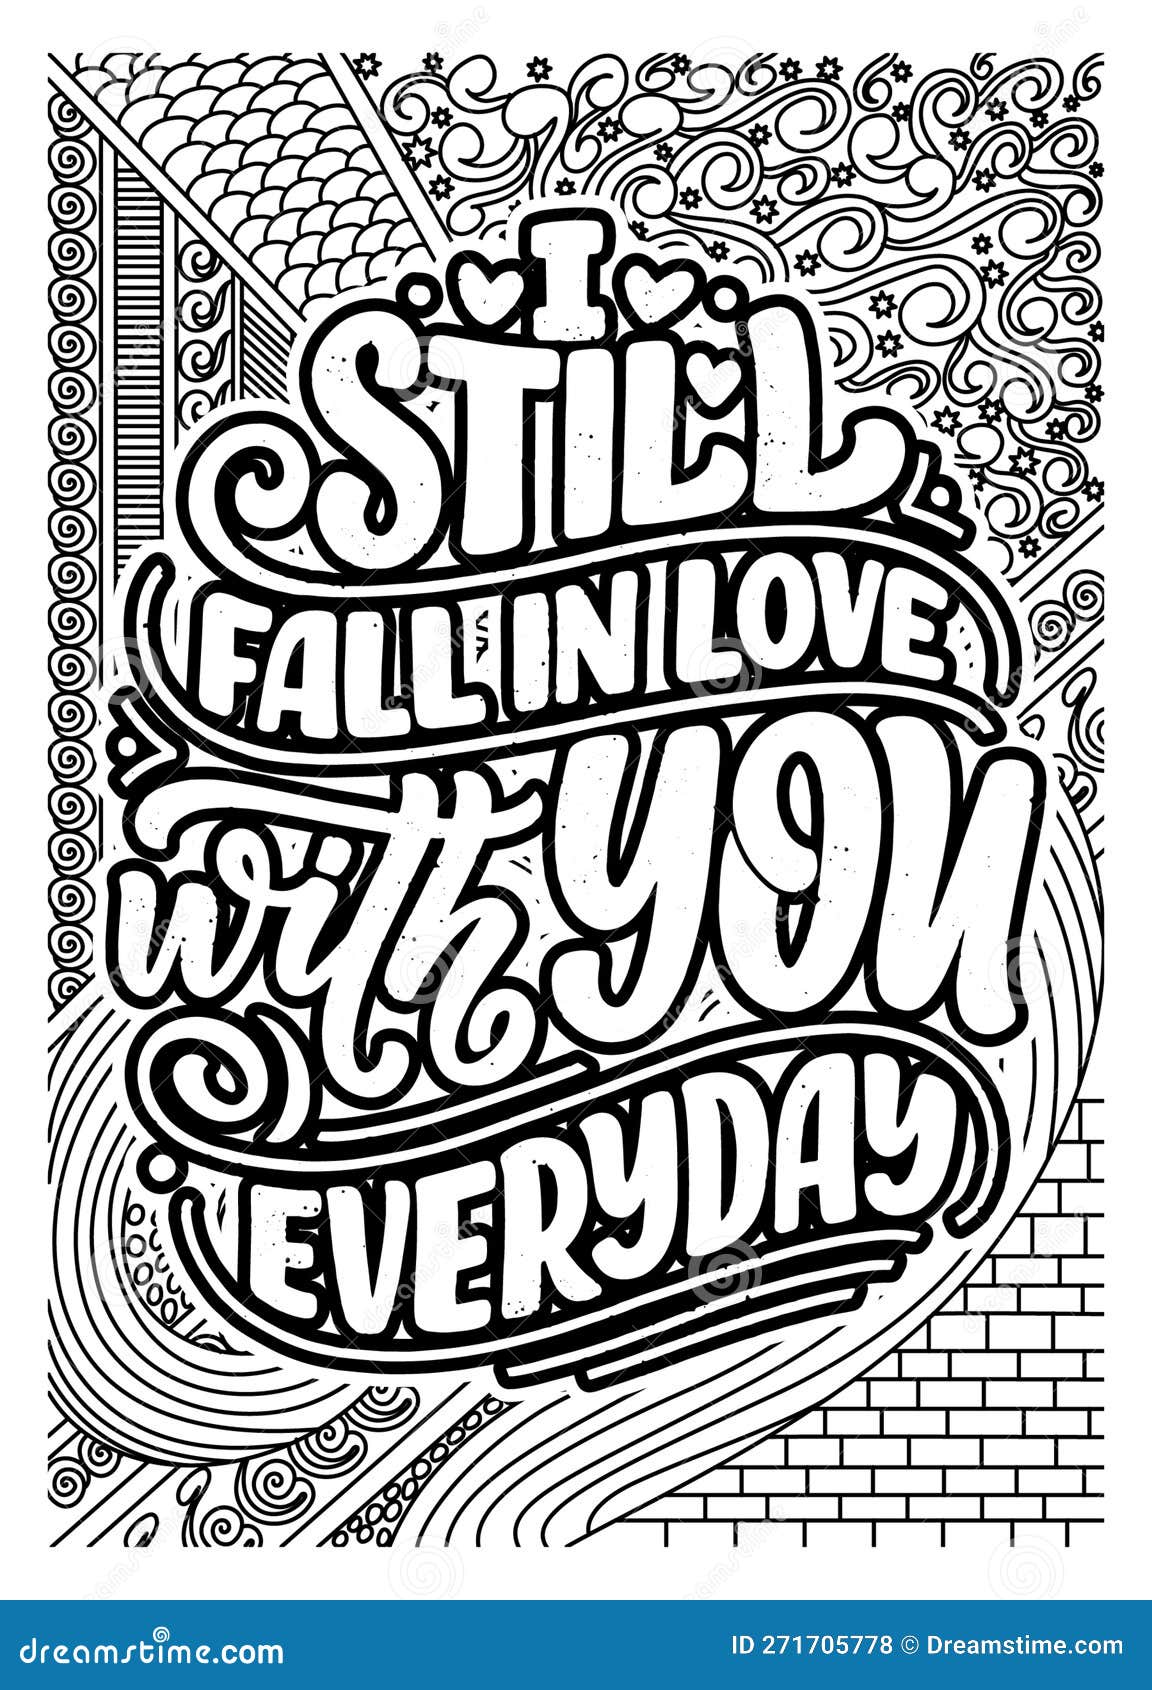 Love motivational quote coloring pages for adults love coloring page design stock illustration